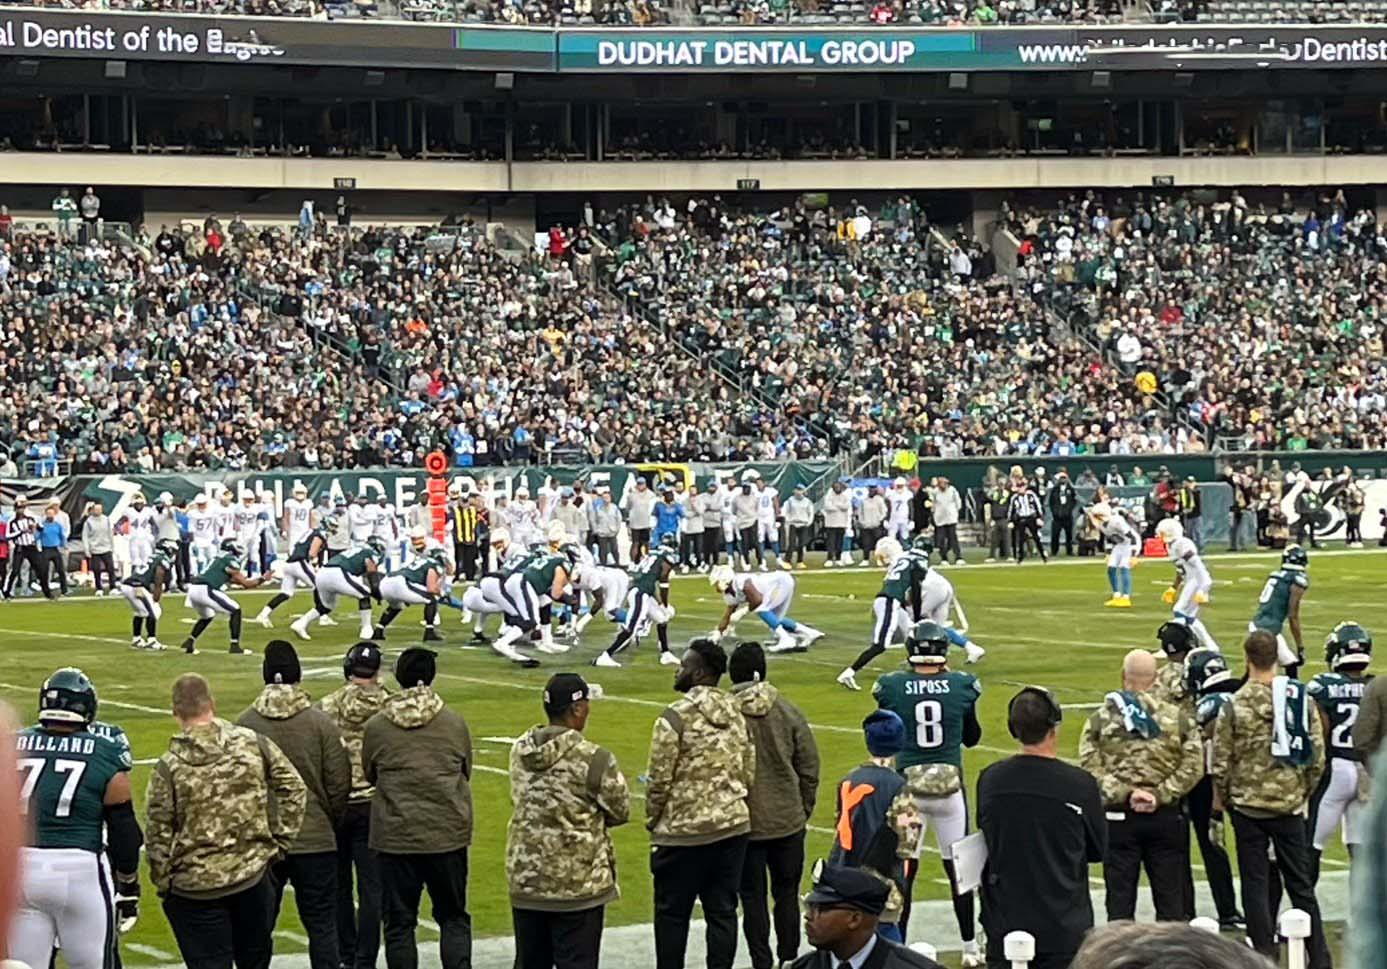 lincoln financial field section 137｜TikTok Search